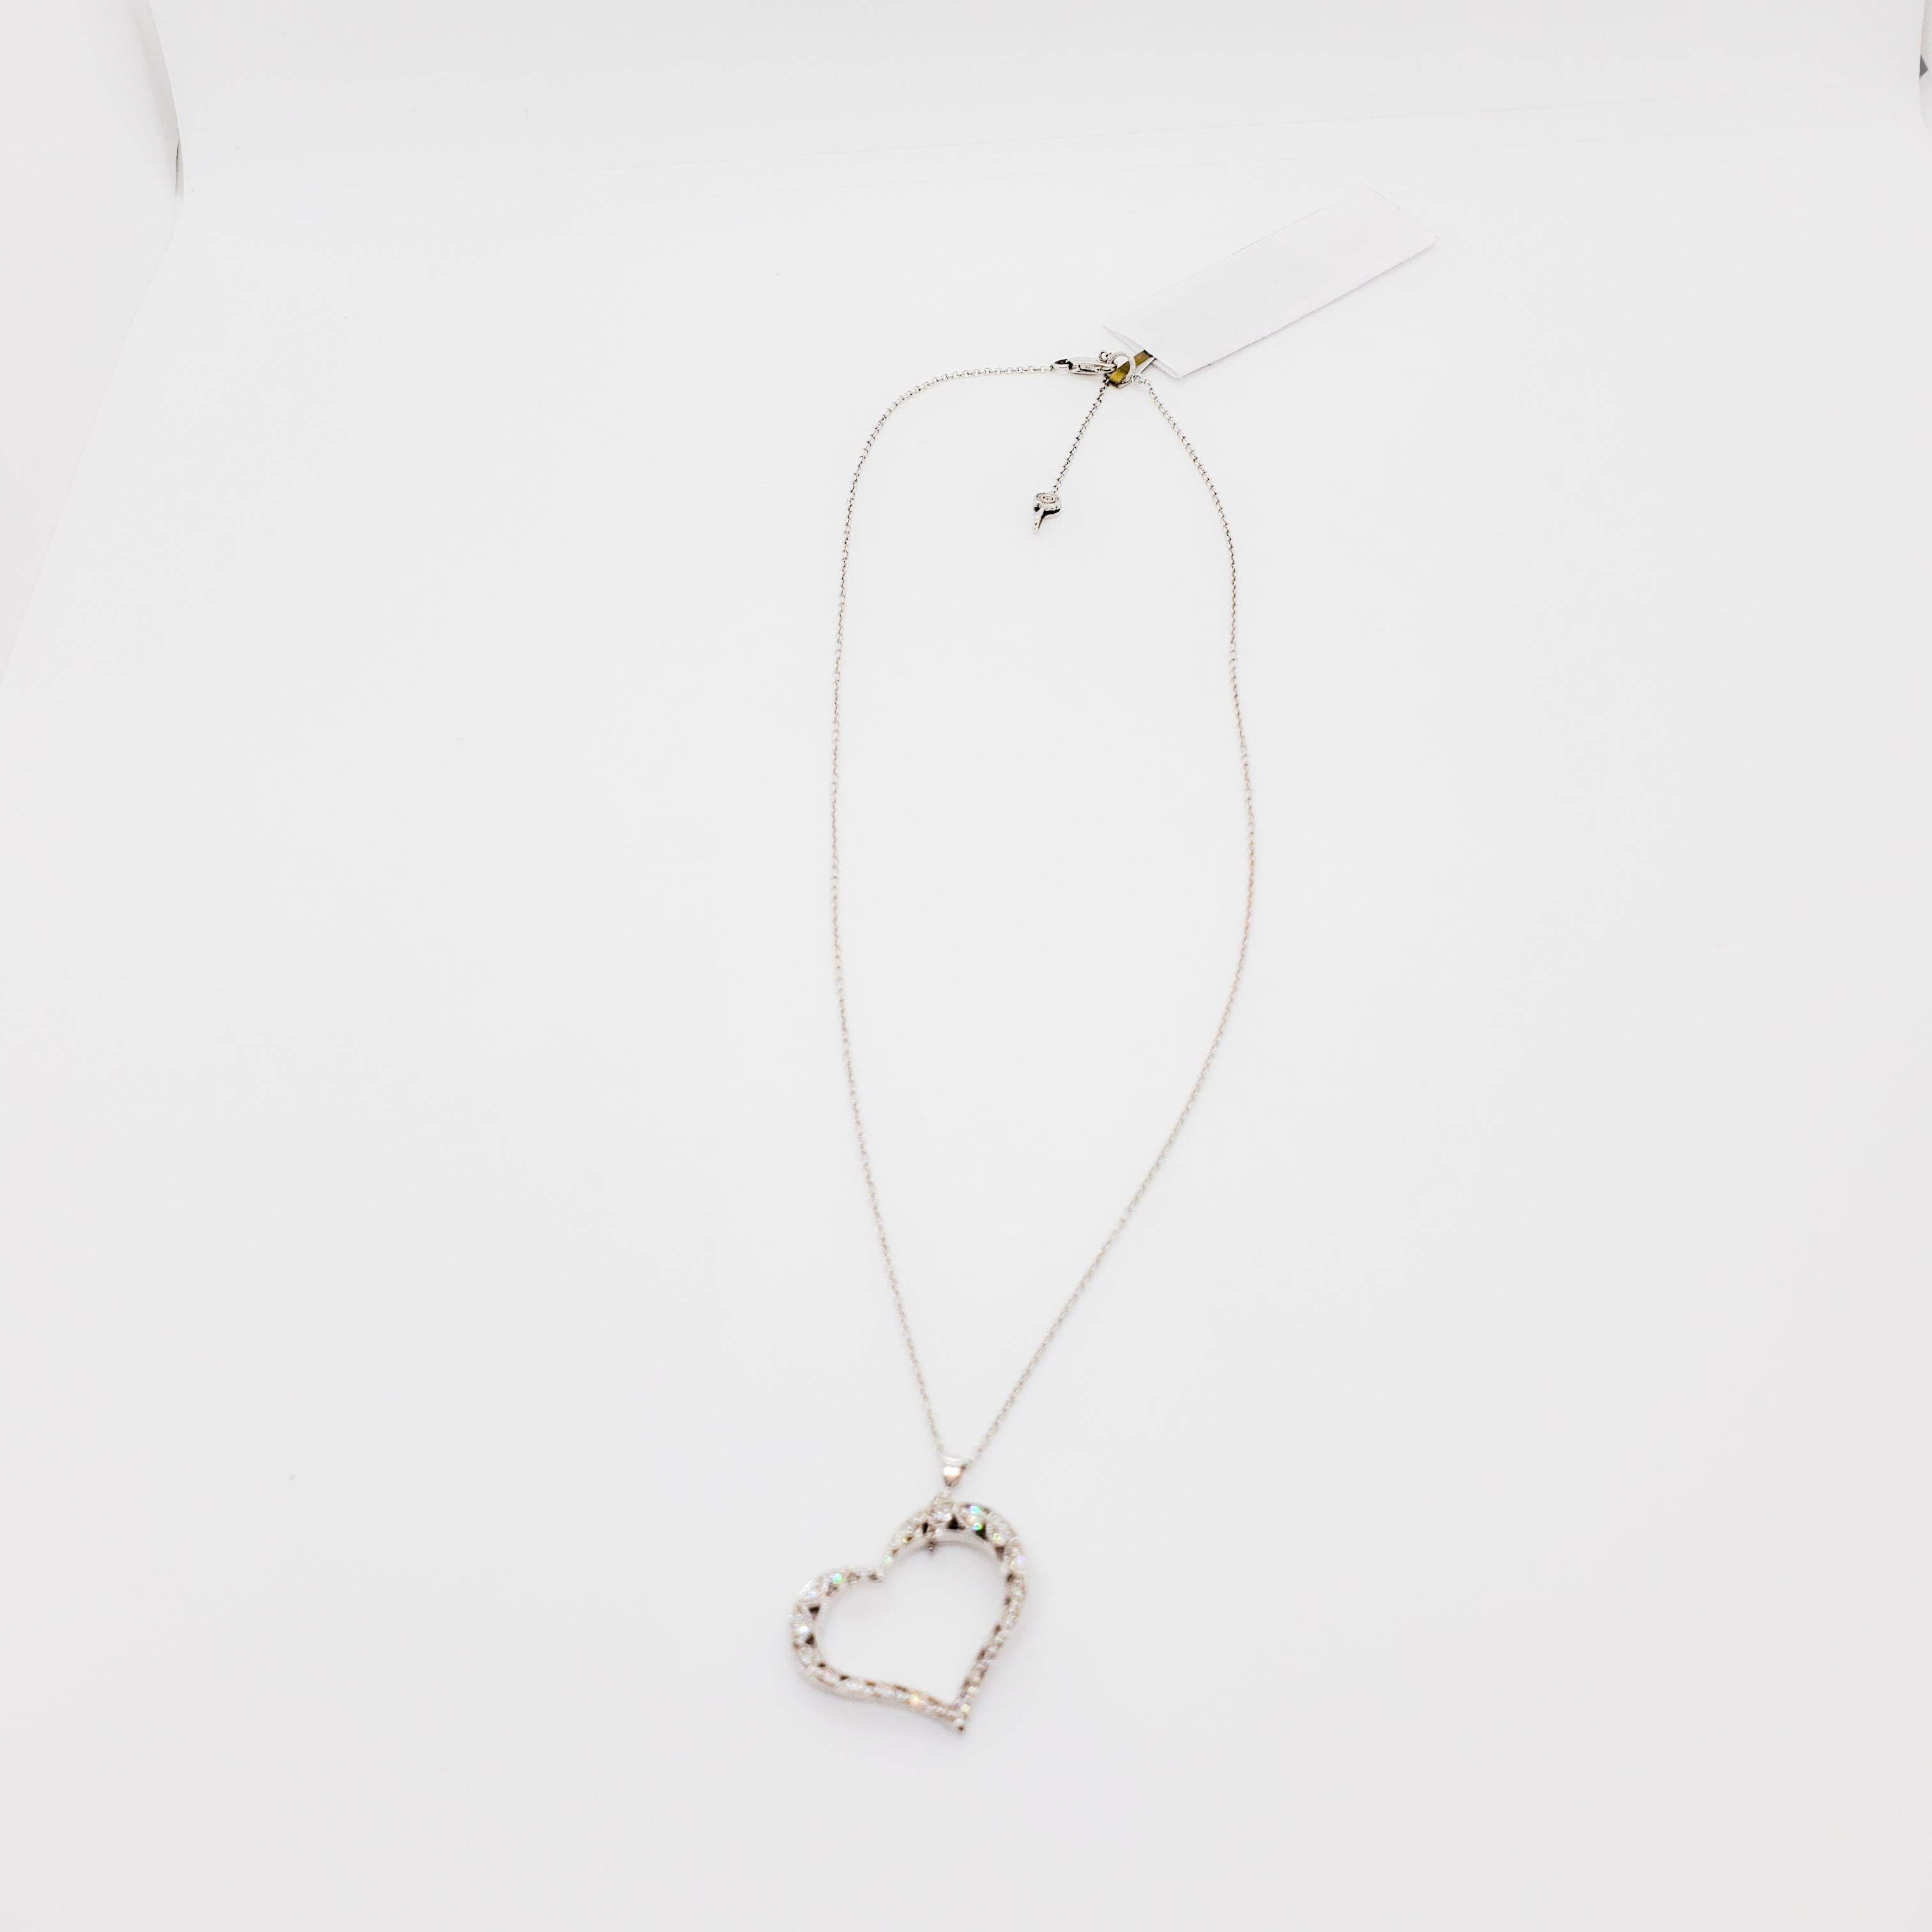 Beautiful and classic Tacori estate heart shape pendant featuring 0.25 ct. of white diamond rounds with a 18k white gold chain and handmade mounting.  Length is 18